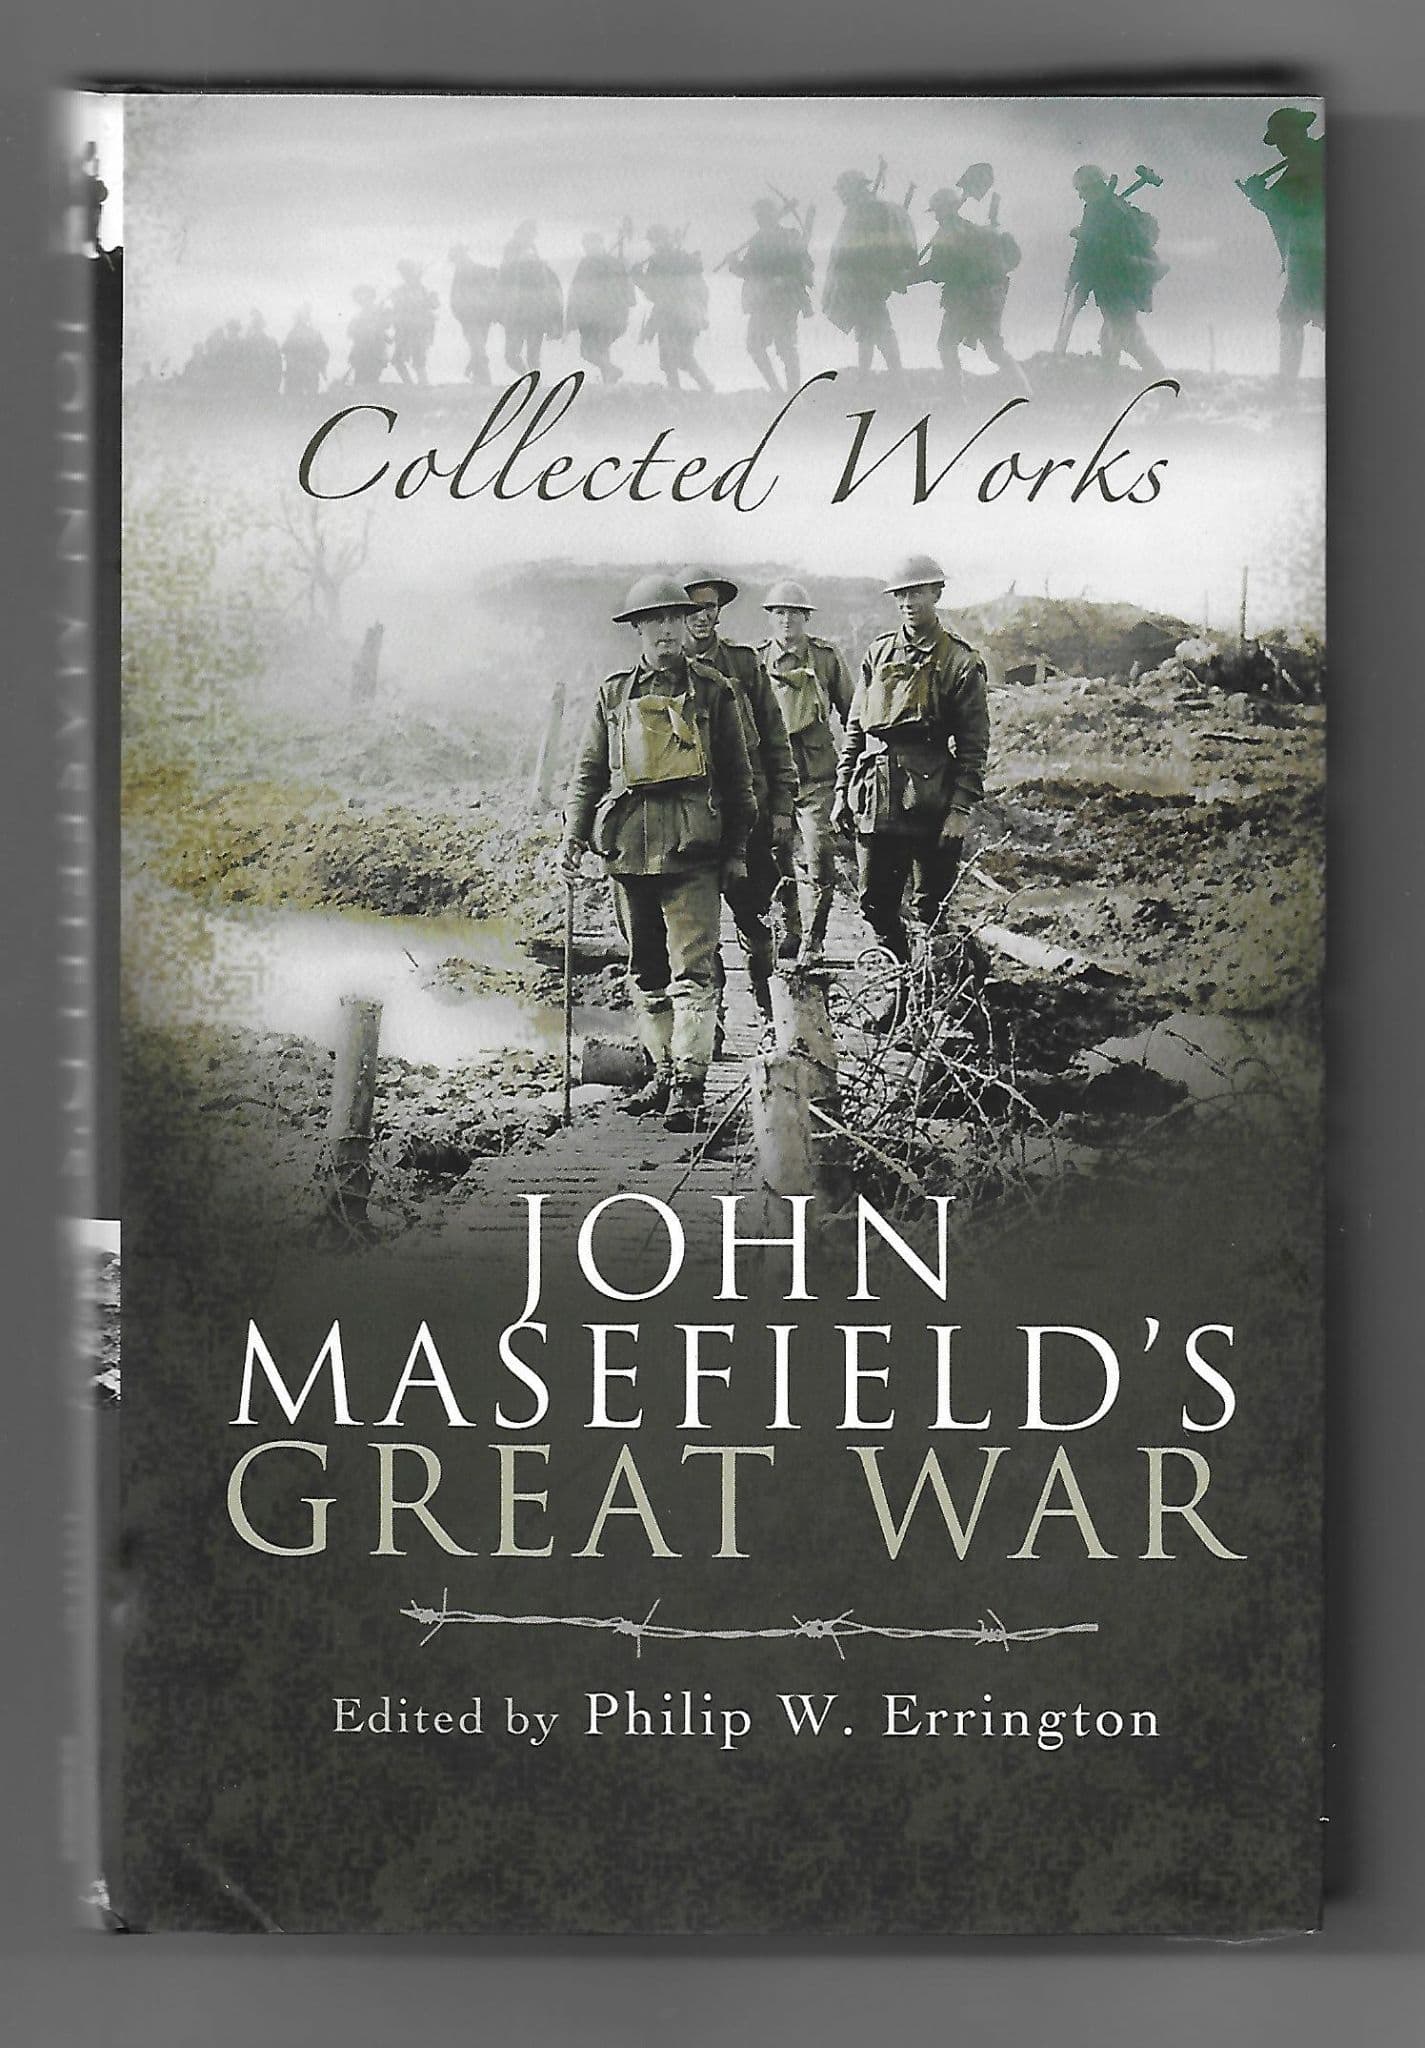 John Masefield's Great War: Collected Works